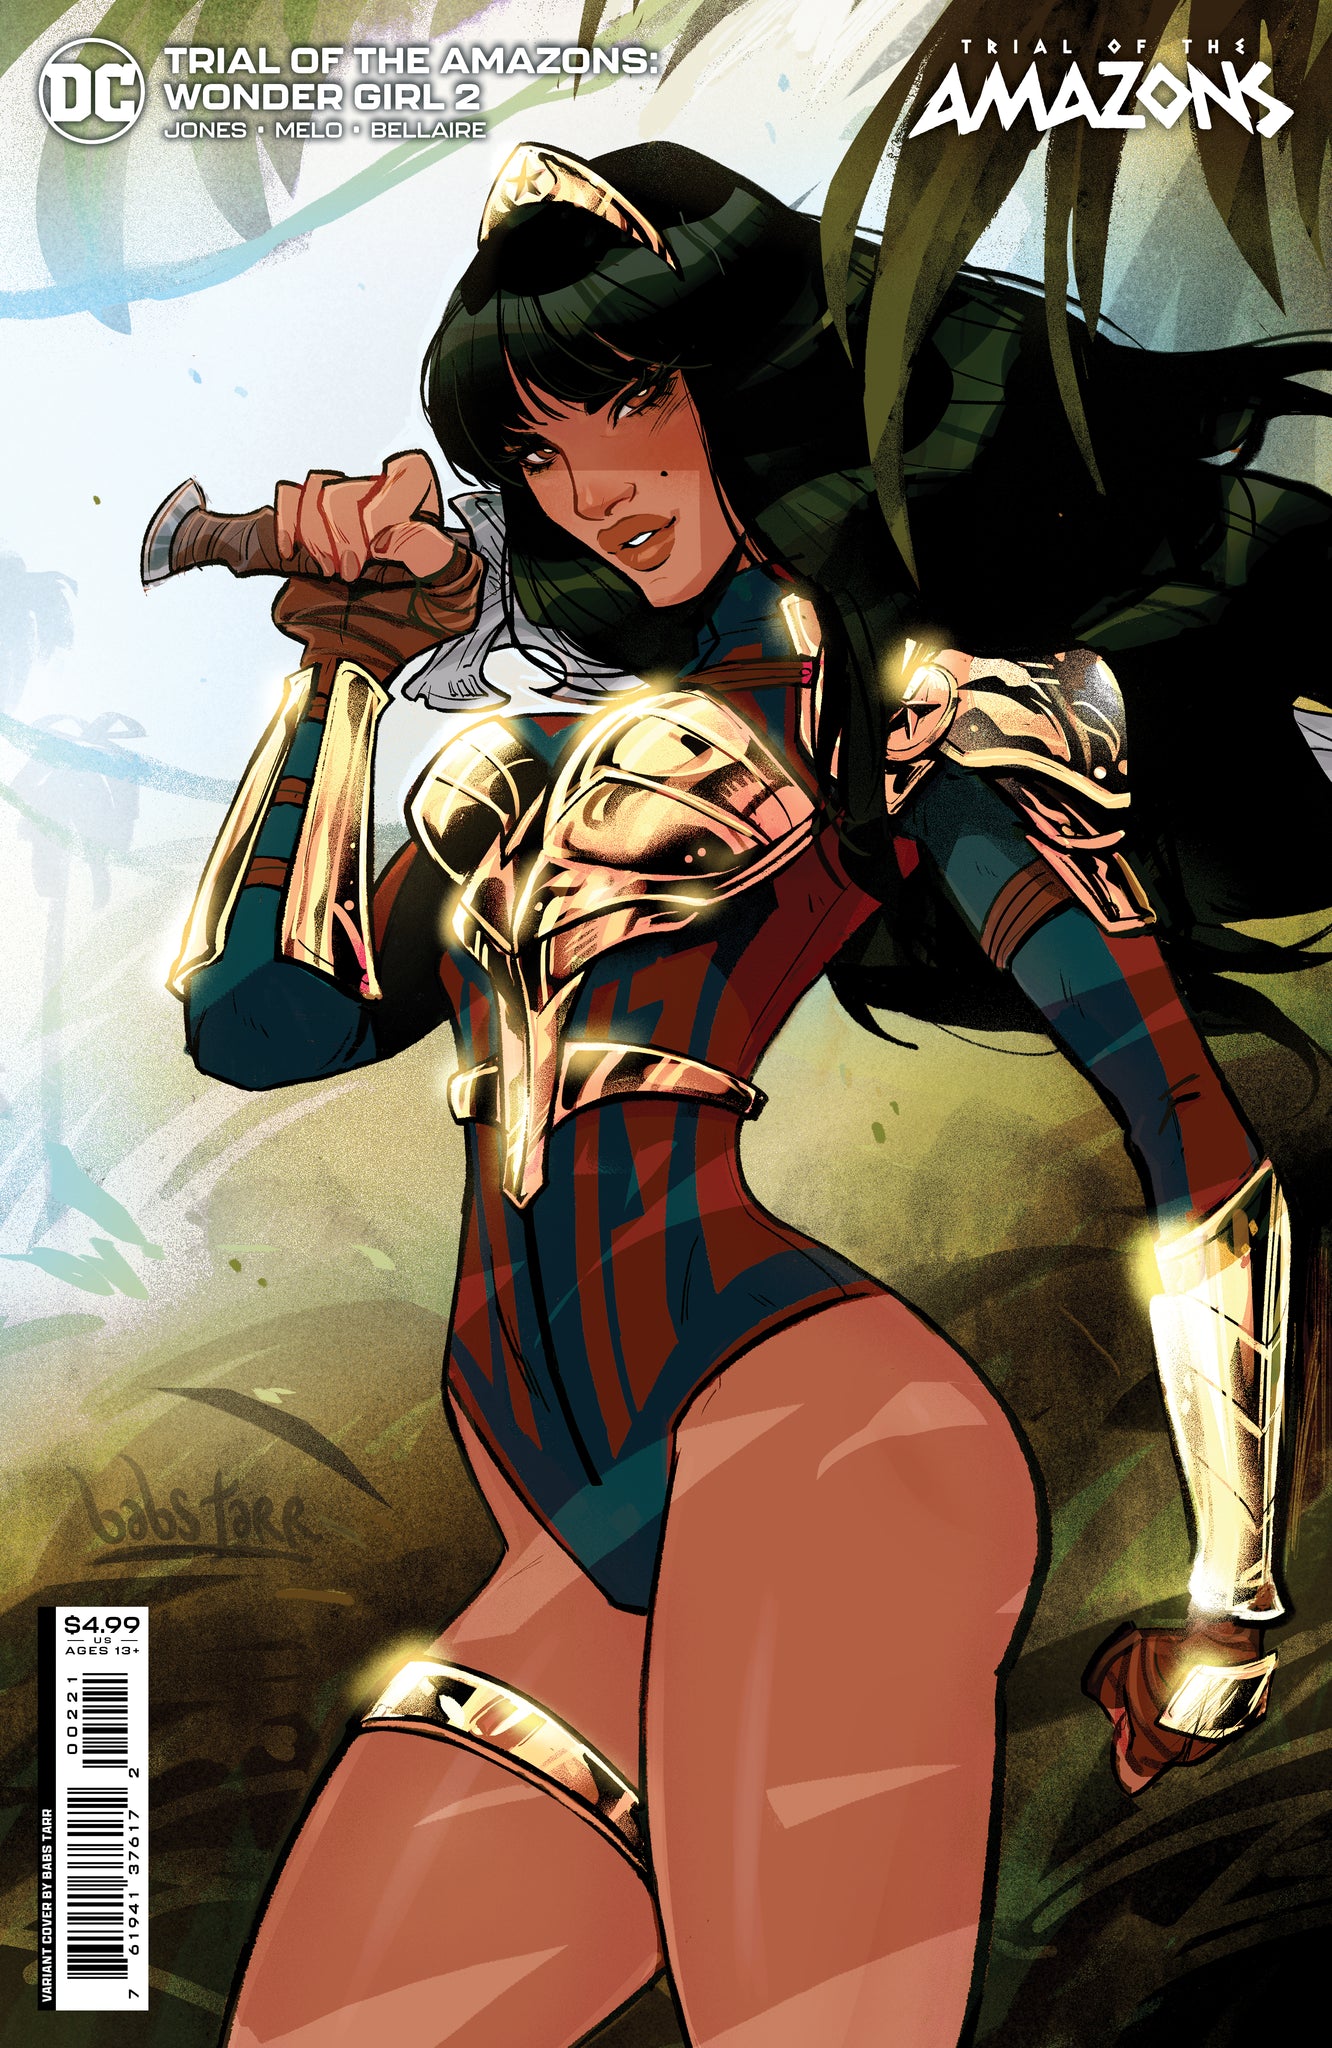 TIRAL OF THE AMAZONS WONDER GIRL #2 (OF 2)